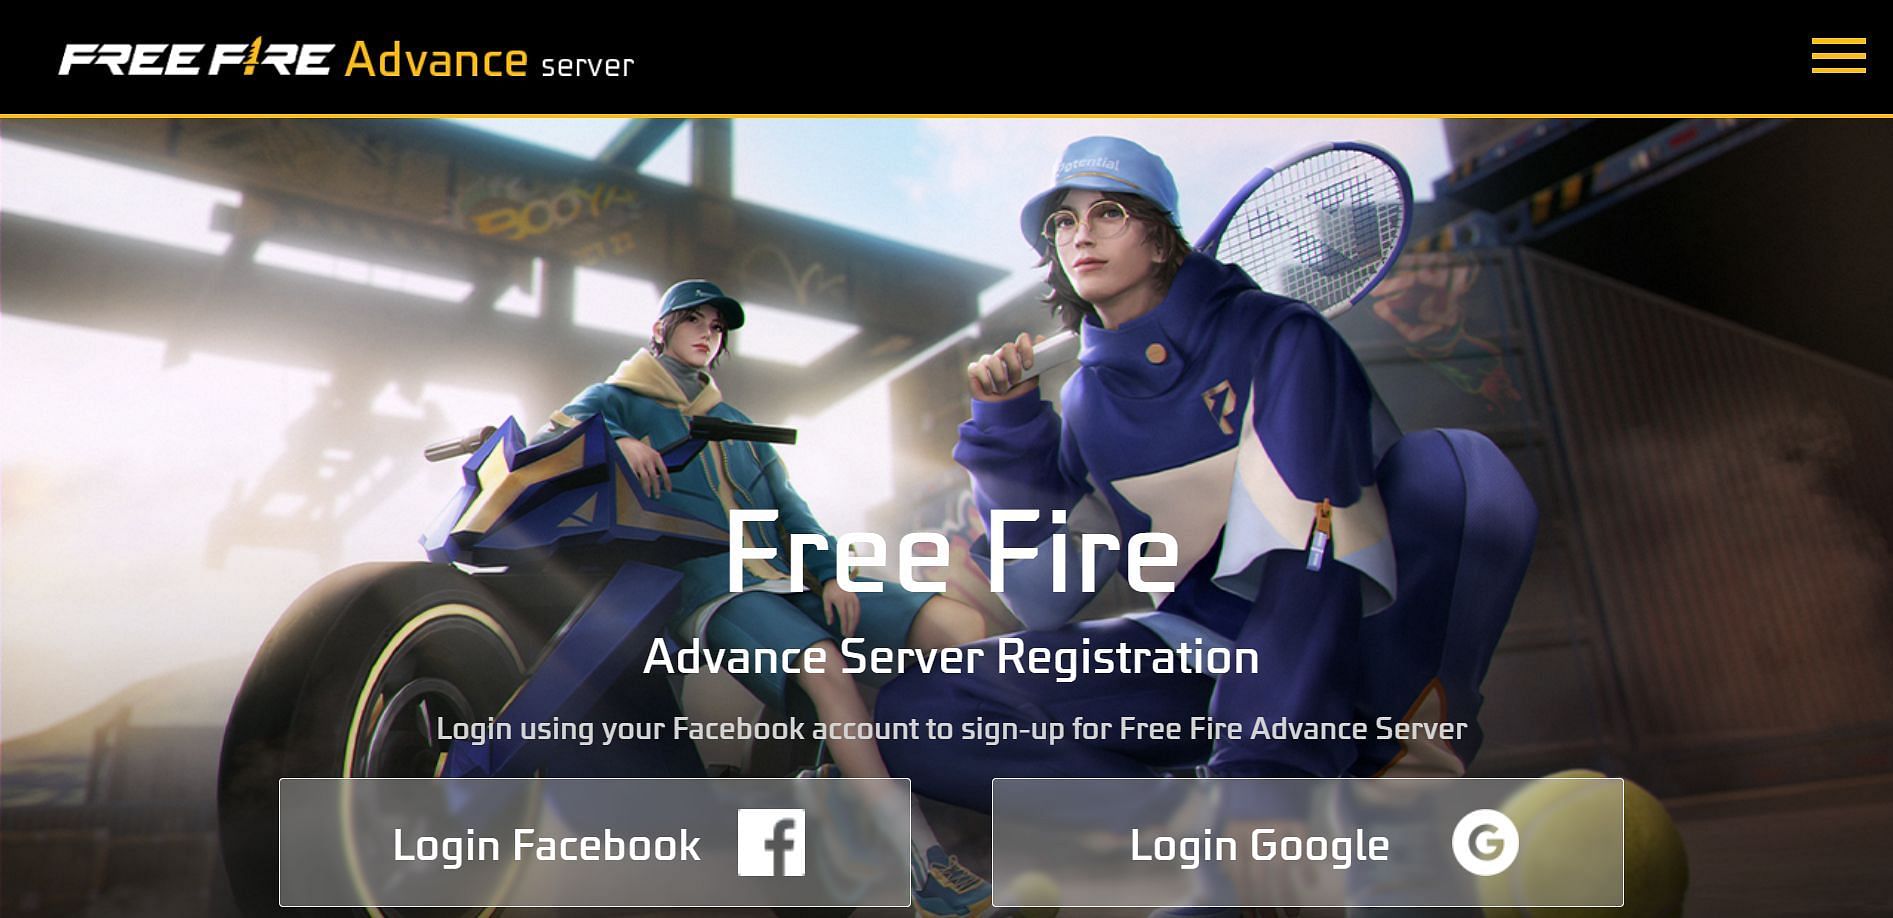 Use one of the two login options to log in (Image via Garena)